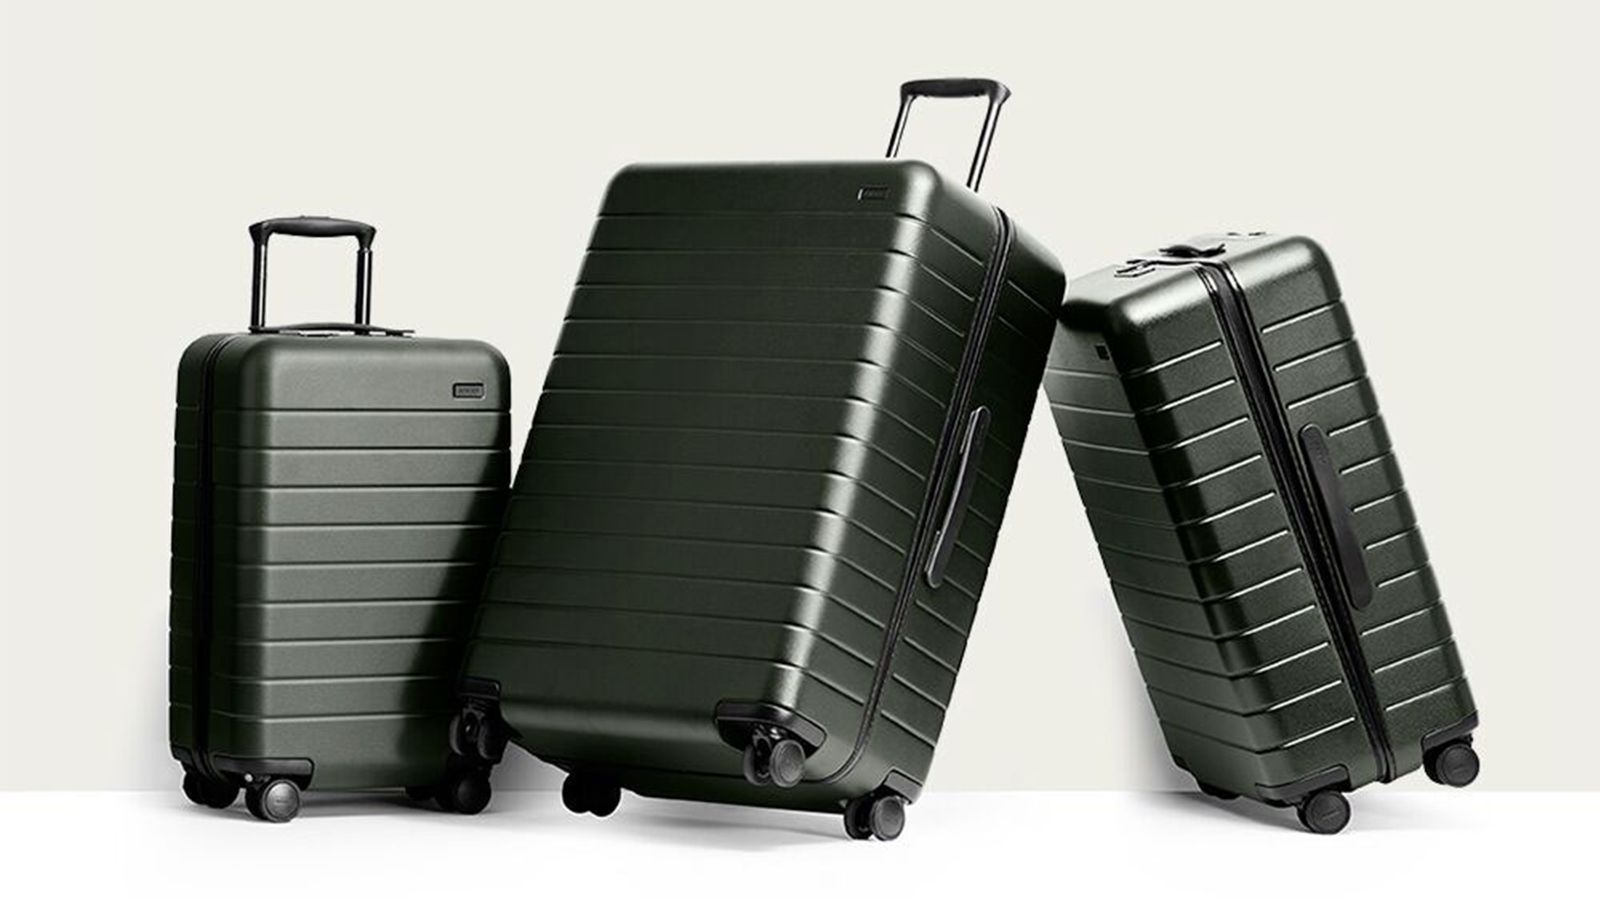 AWAY LUGGAGE Which size is for YOU?, Carry on, Bigger Carry On, Medium